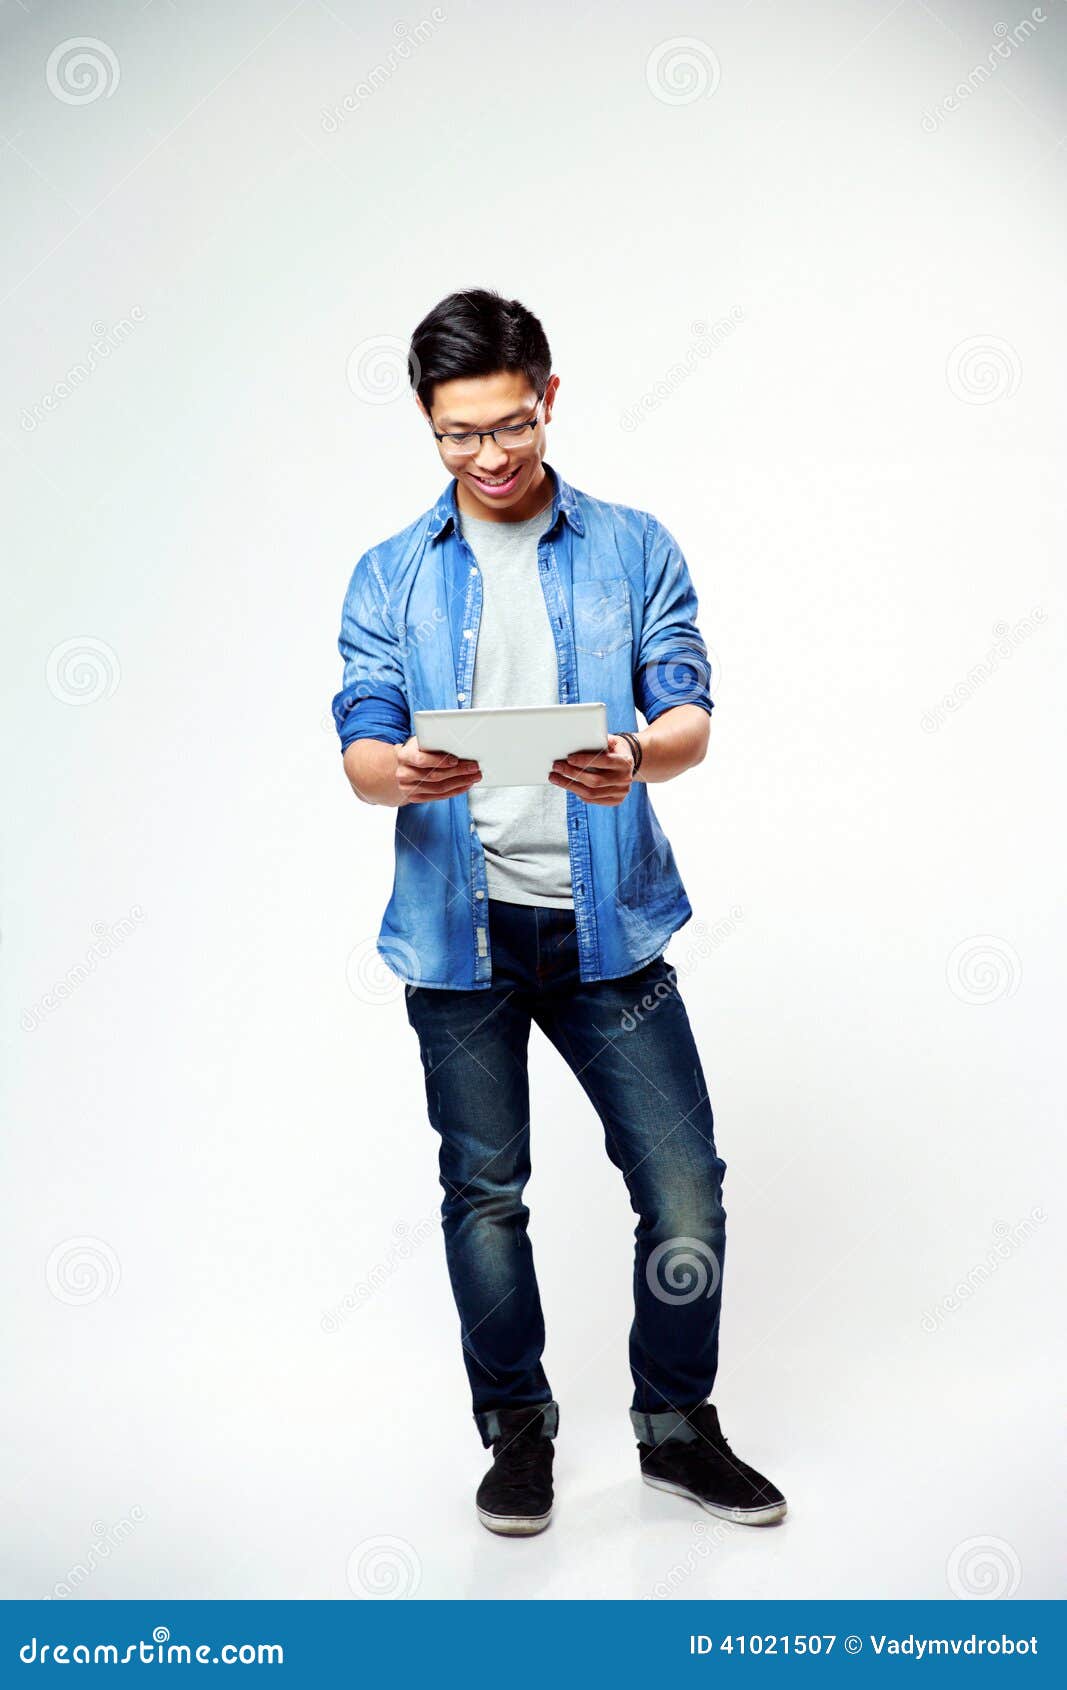 Young Happy Man Standing with Laptop Stock Image - Image of internet ...